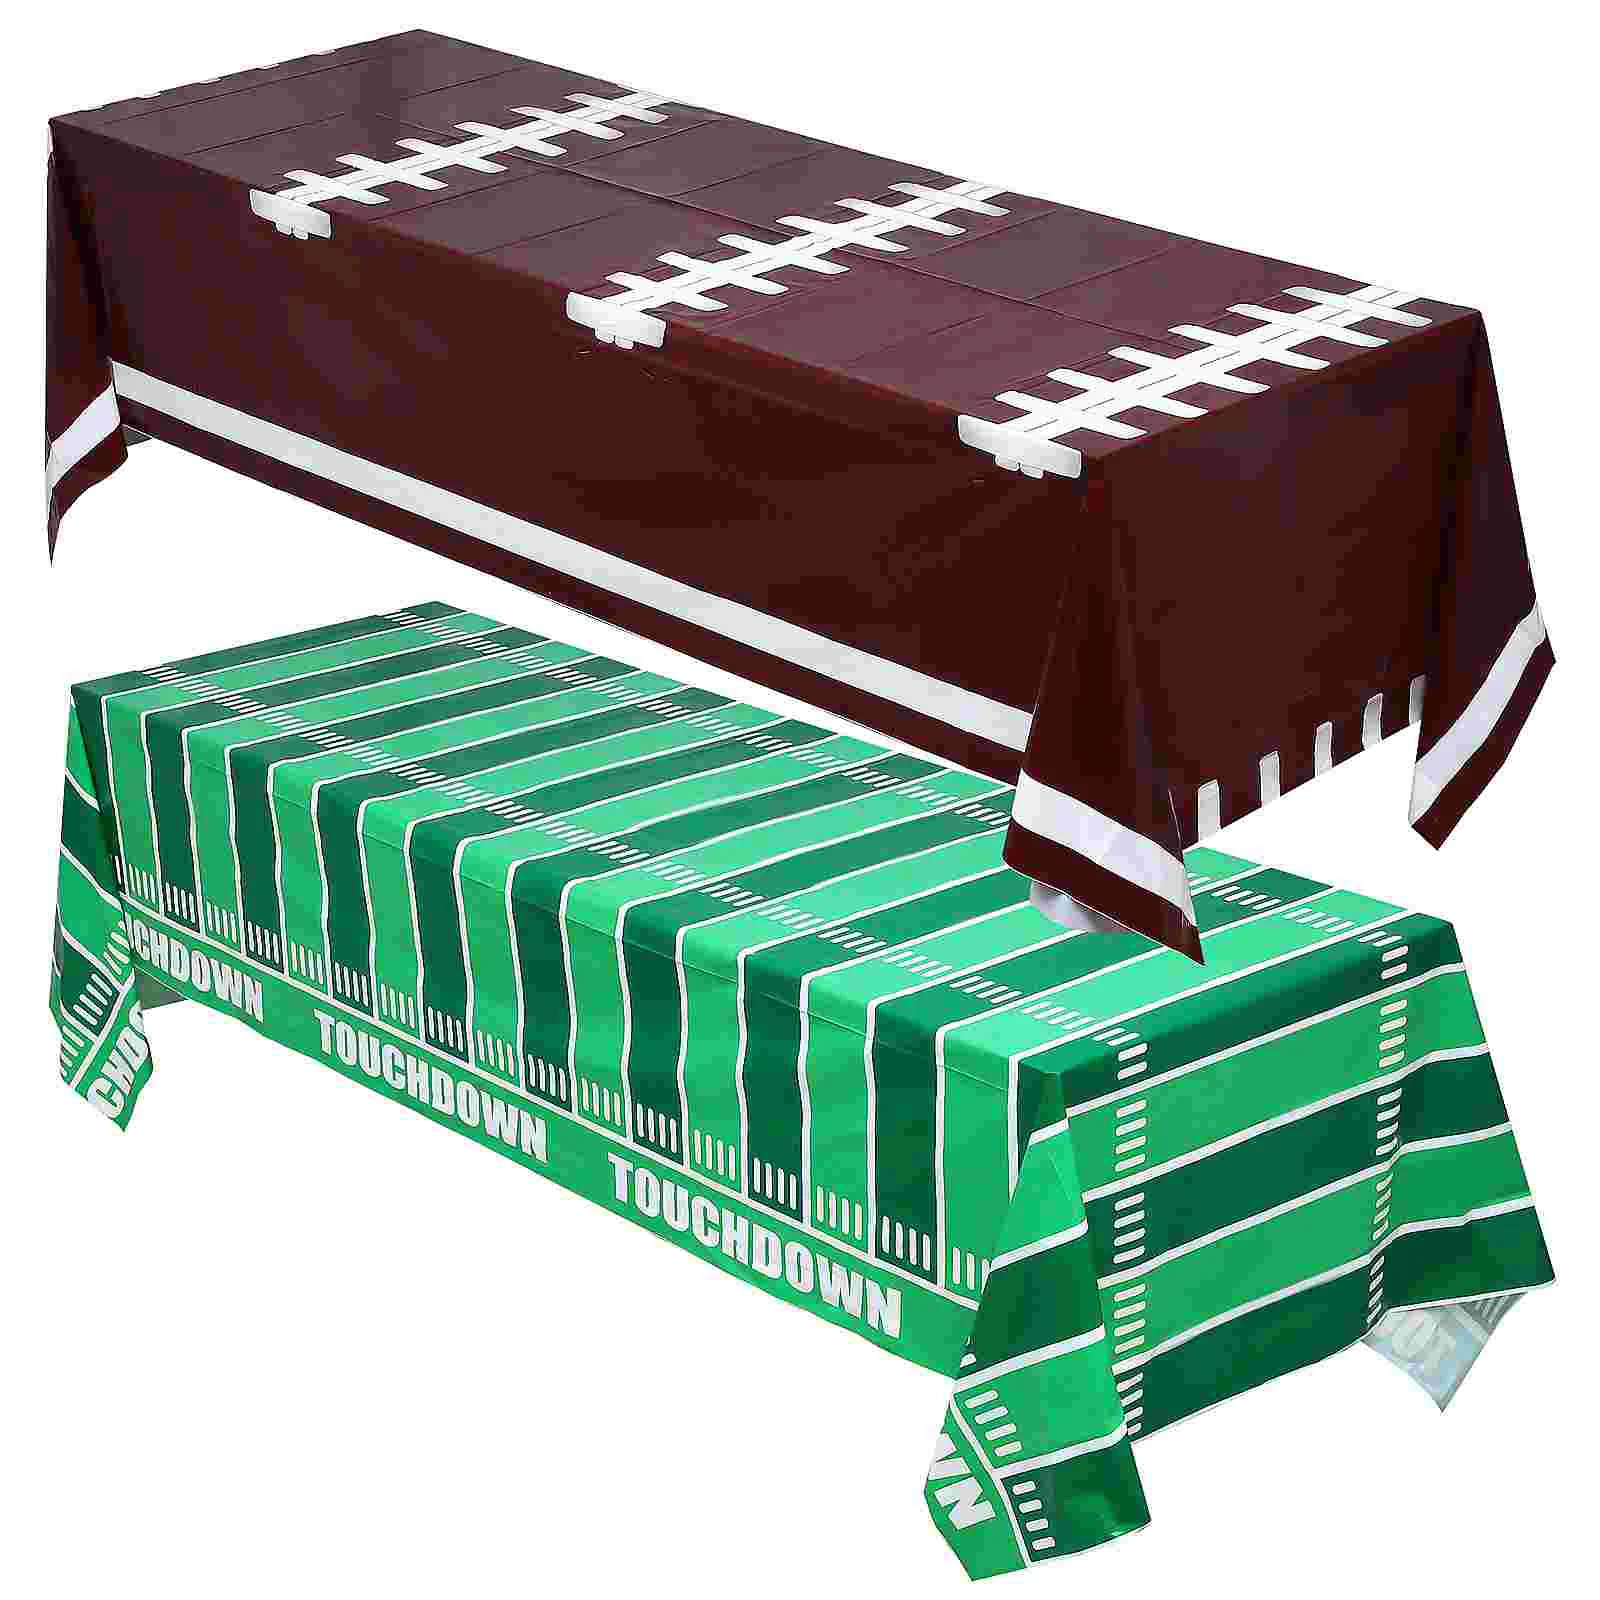 

2 Pcs Football Field Tablecloth Rugby Party Decorations Dining Cloths Parties Venue Setting Props Tablecloths